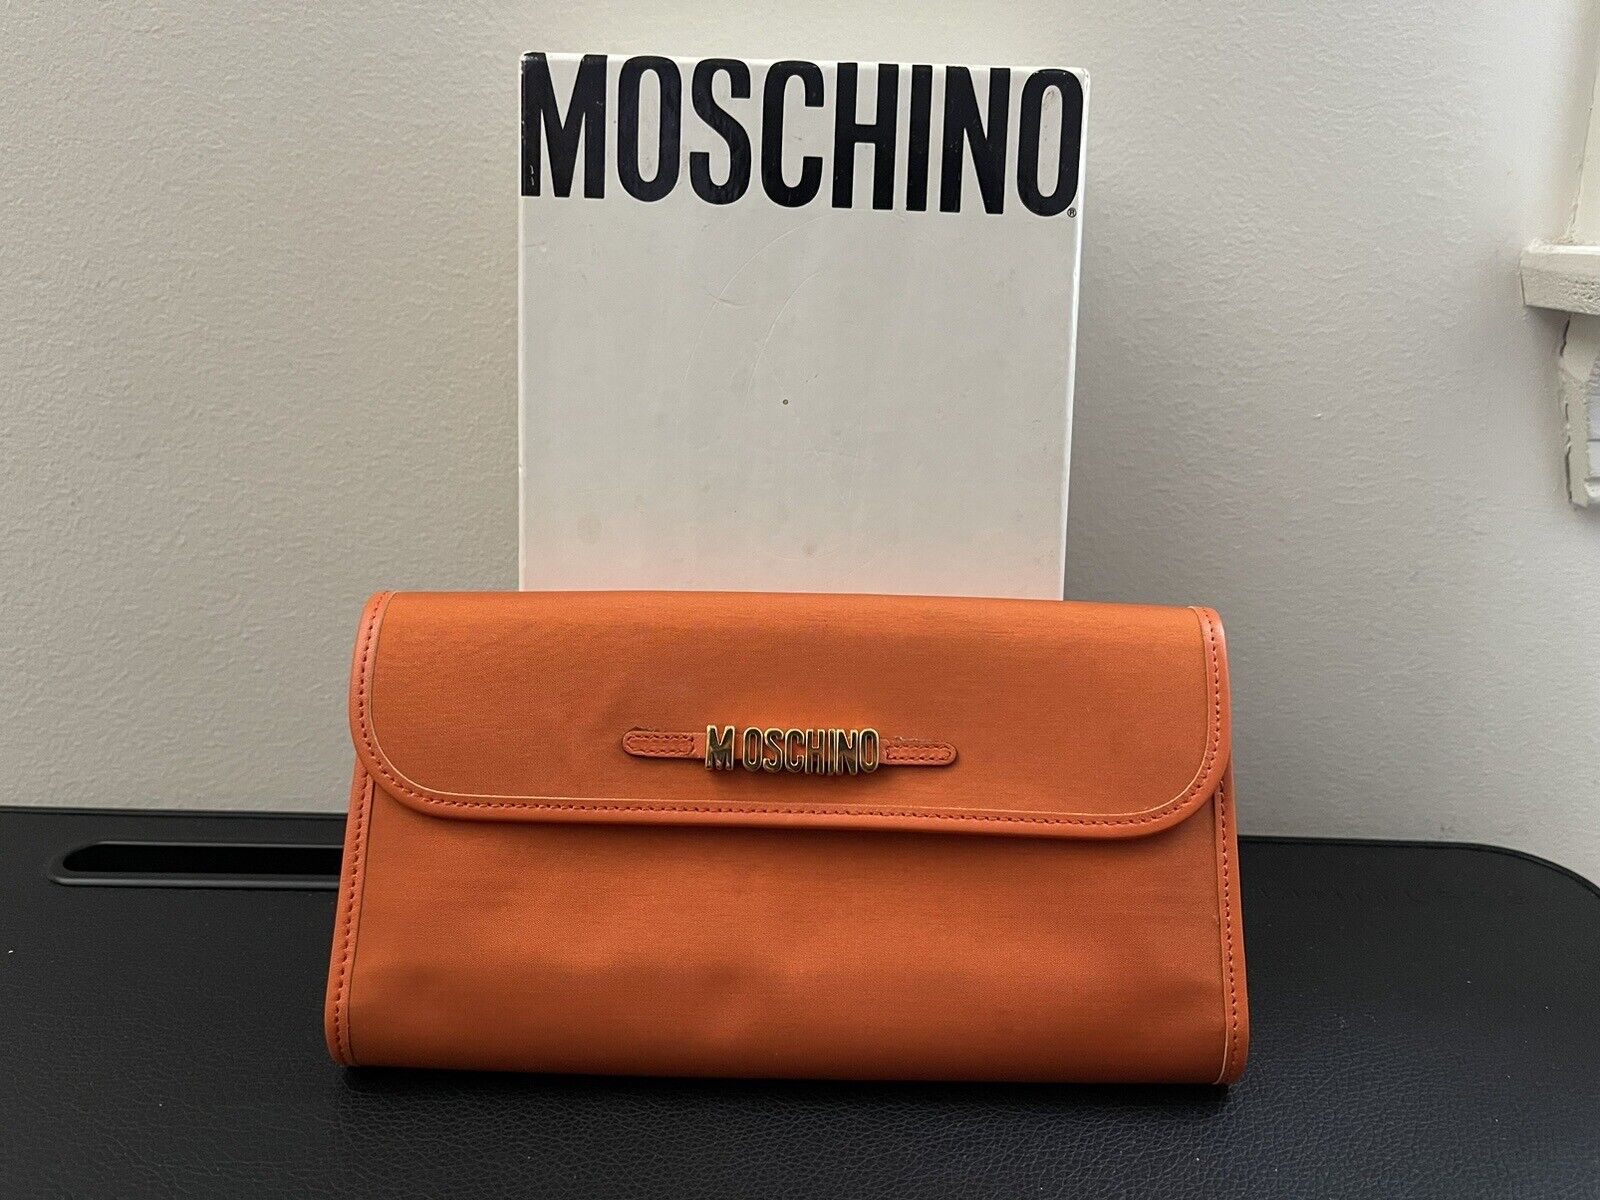 Moschino Borse Redwall Woman Orange Leather Trifold Wallet Made in Italy w Box